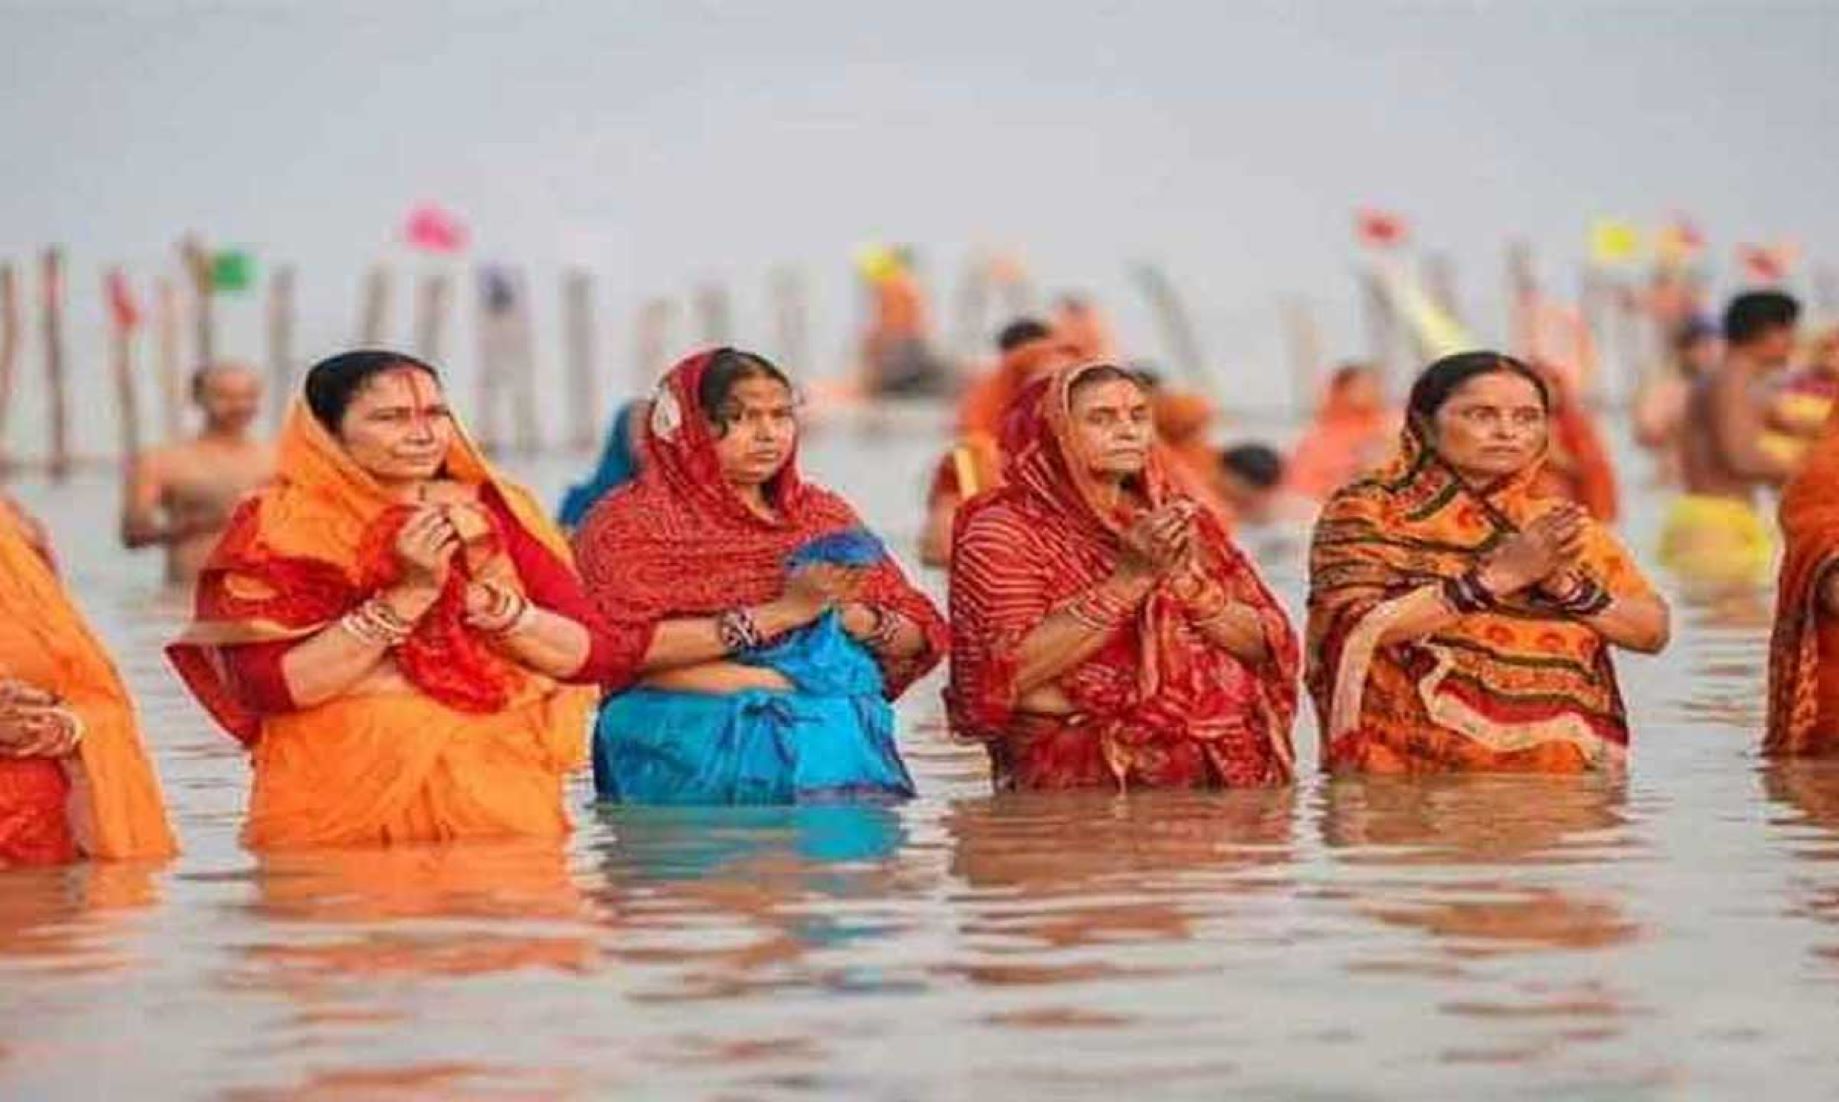 53 People Drowned In India’s Bihar During Four-Day Hindu Festival